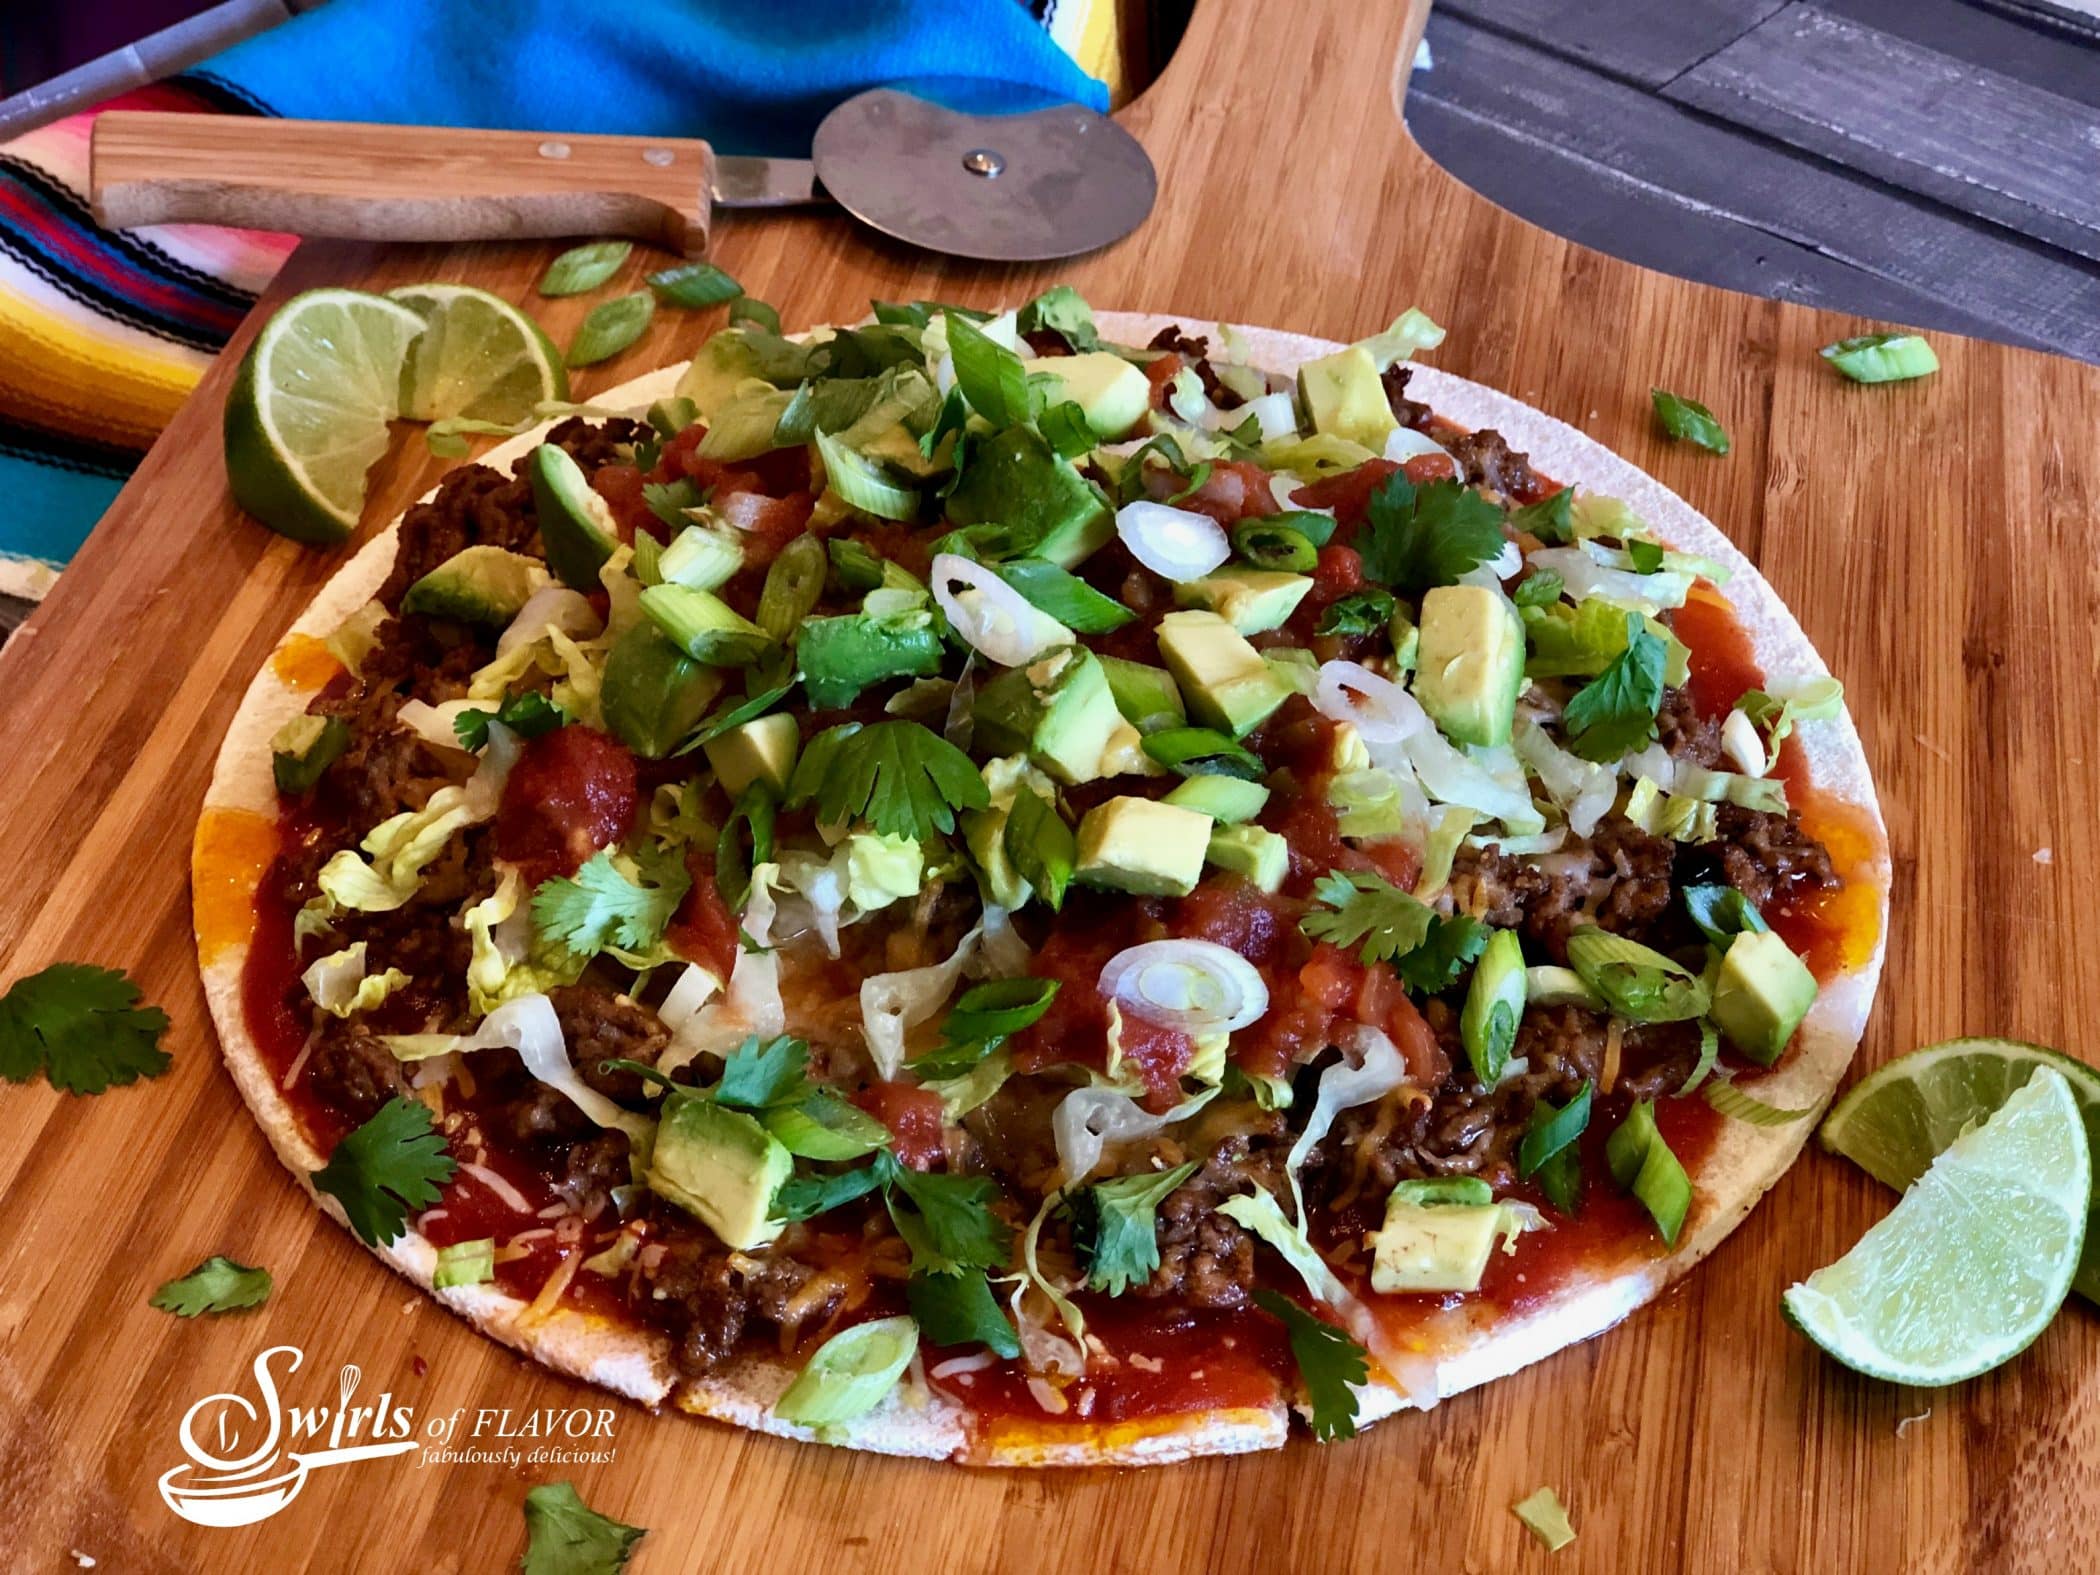 Taco Pizza With Cauliflower Crust puts a delicious twist on Taco Tuesday! Our pizza has all the fillings of a taco on a healthy cauliflower crust for a fun taco dinner that will quickly become a family favorite.